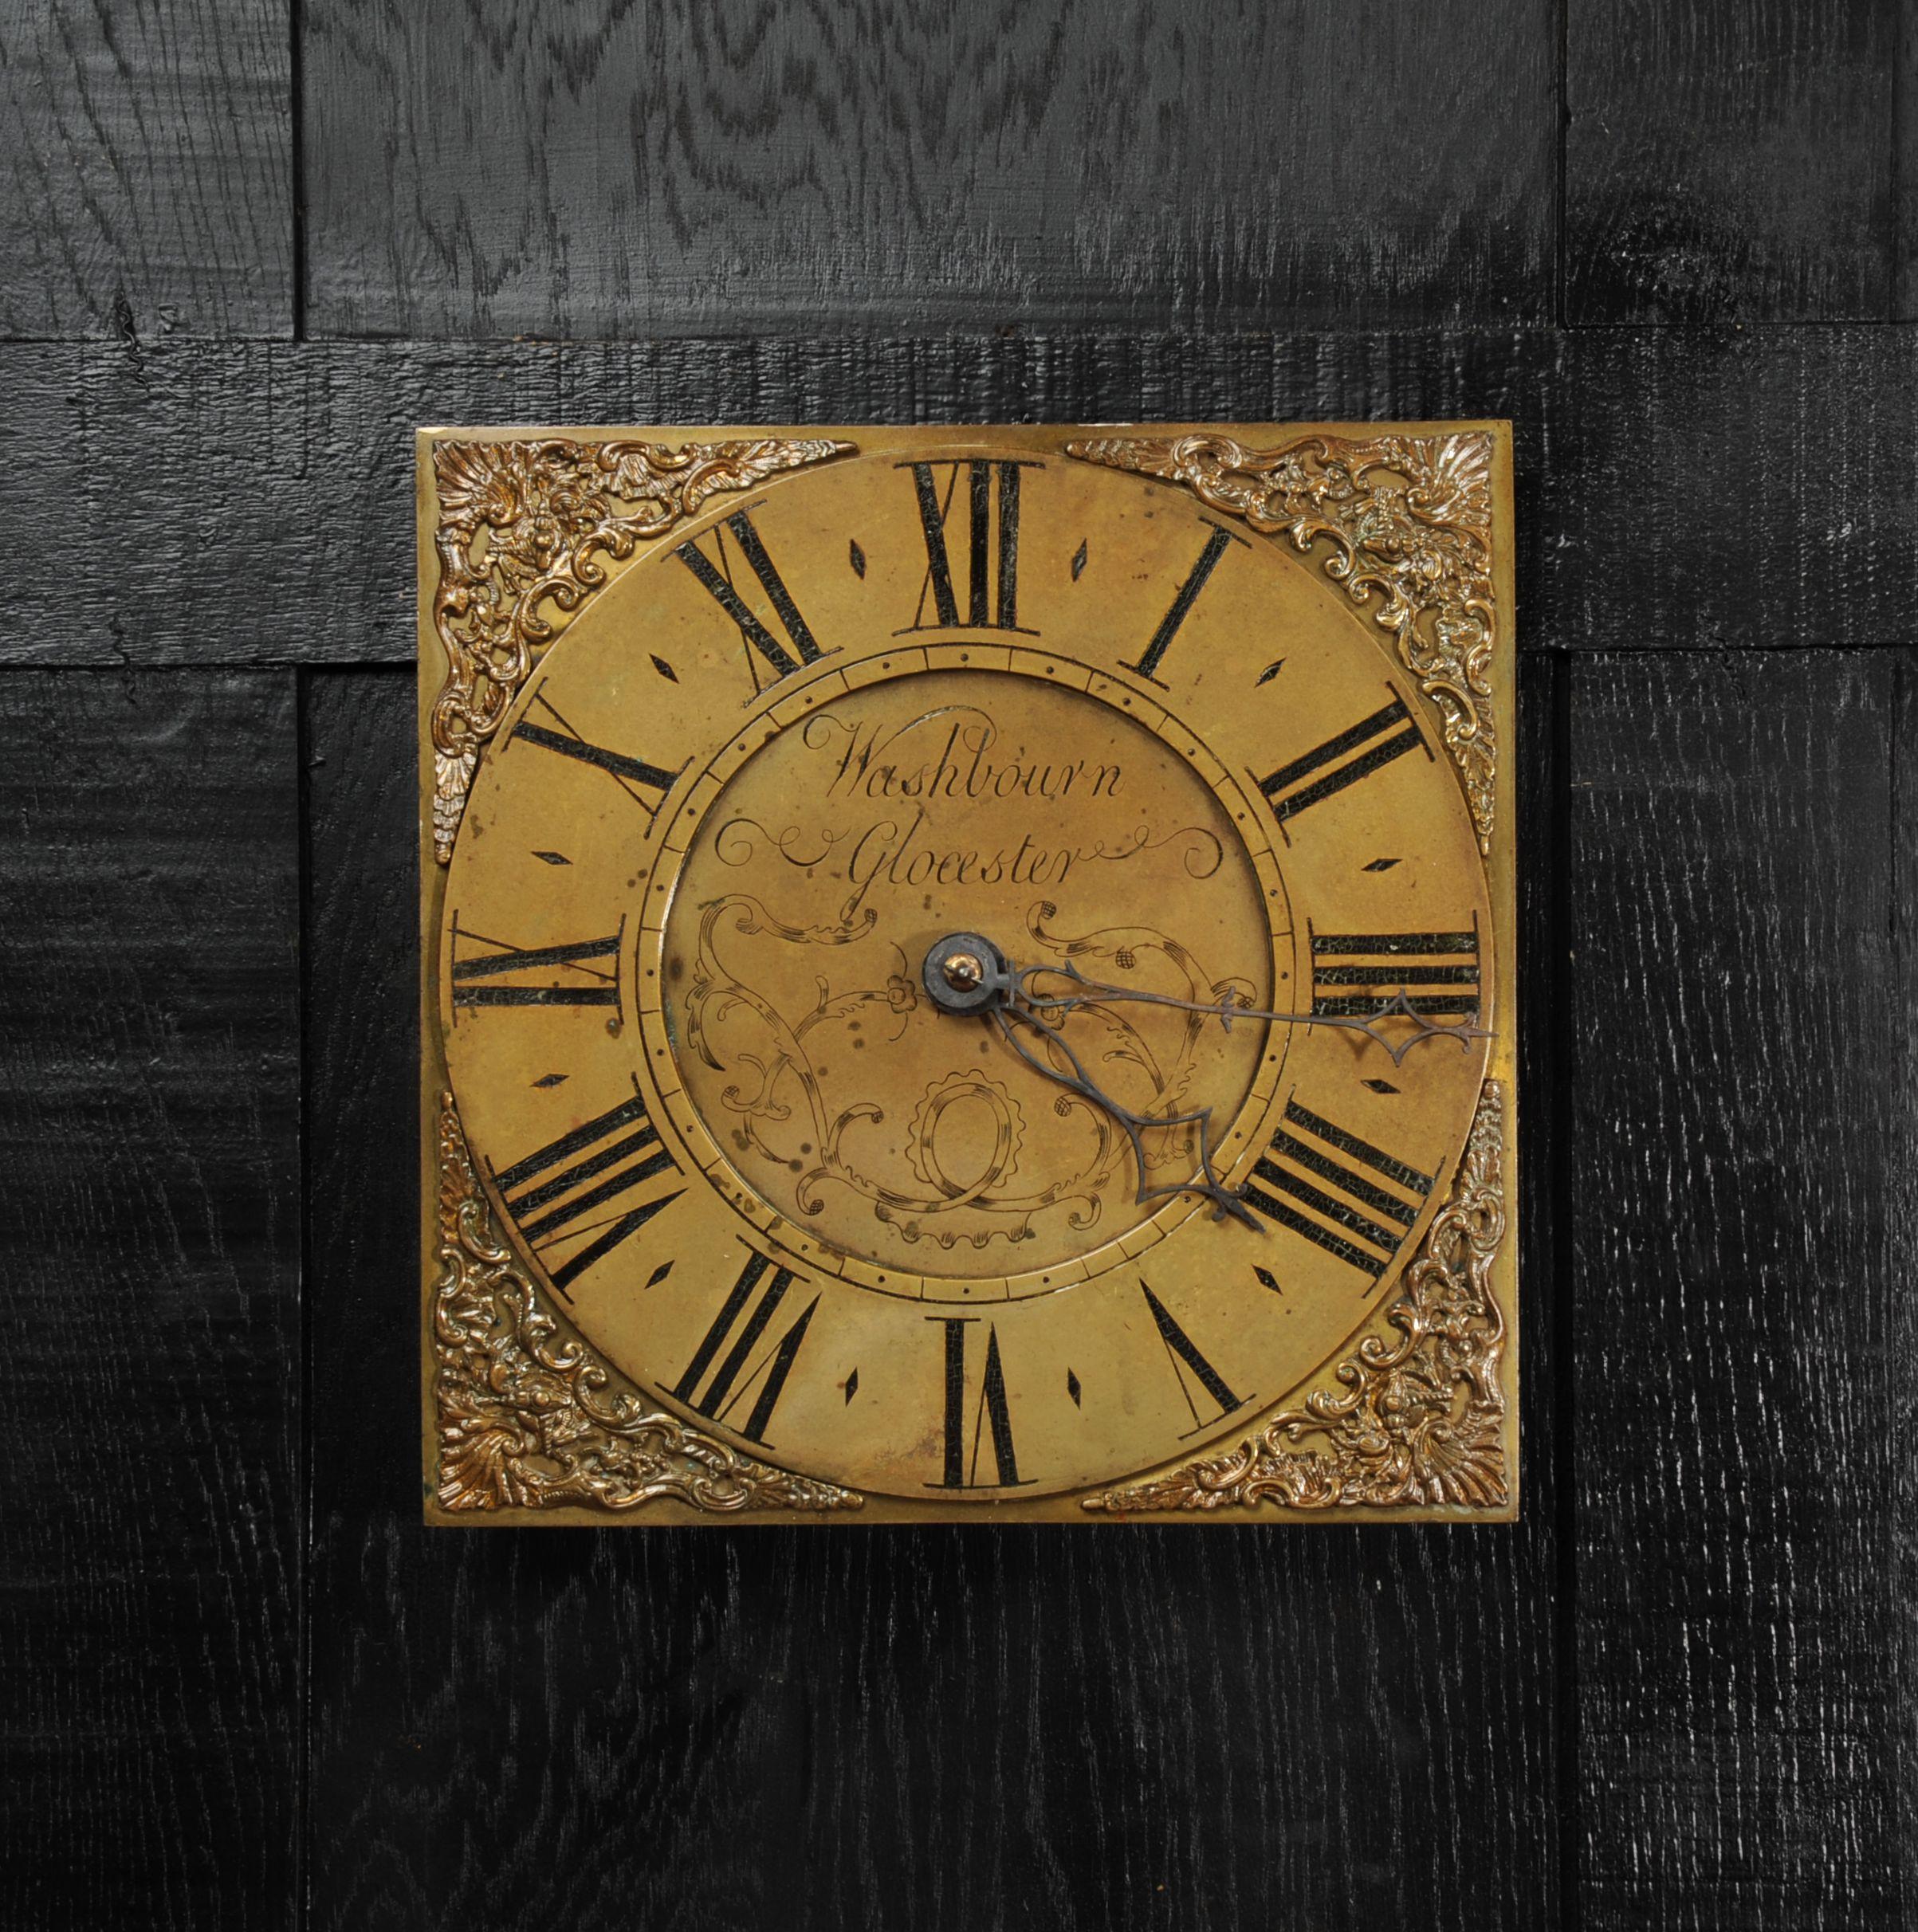 A beautiful antique English clock dial dating from around 1770 by Washbourne of Gloucester. Heavy cast brass with cast spandrels and engraved numbers filled with ancient black wax. Reclaimed from a crumbling water mill by our buyer it has a lovely